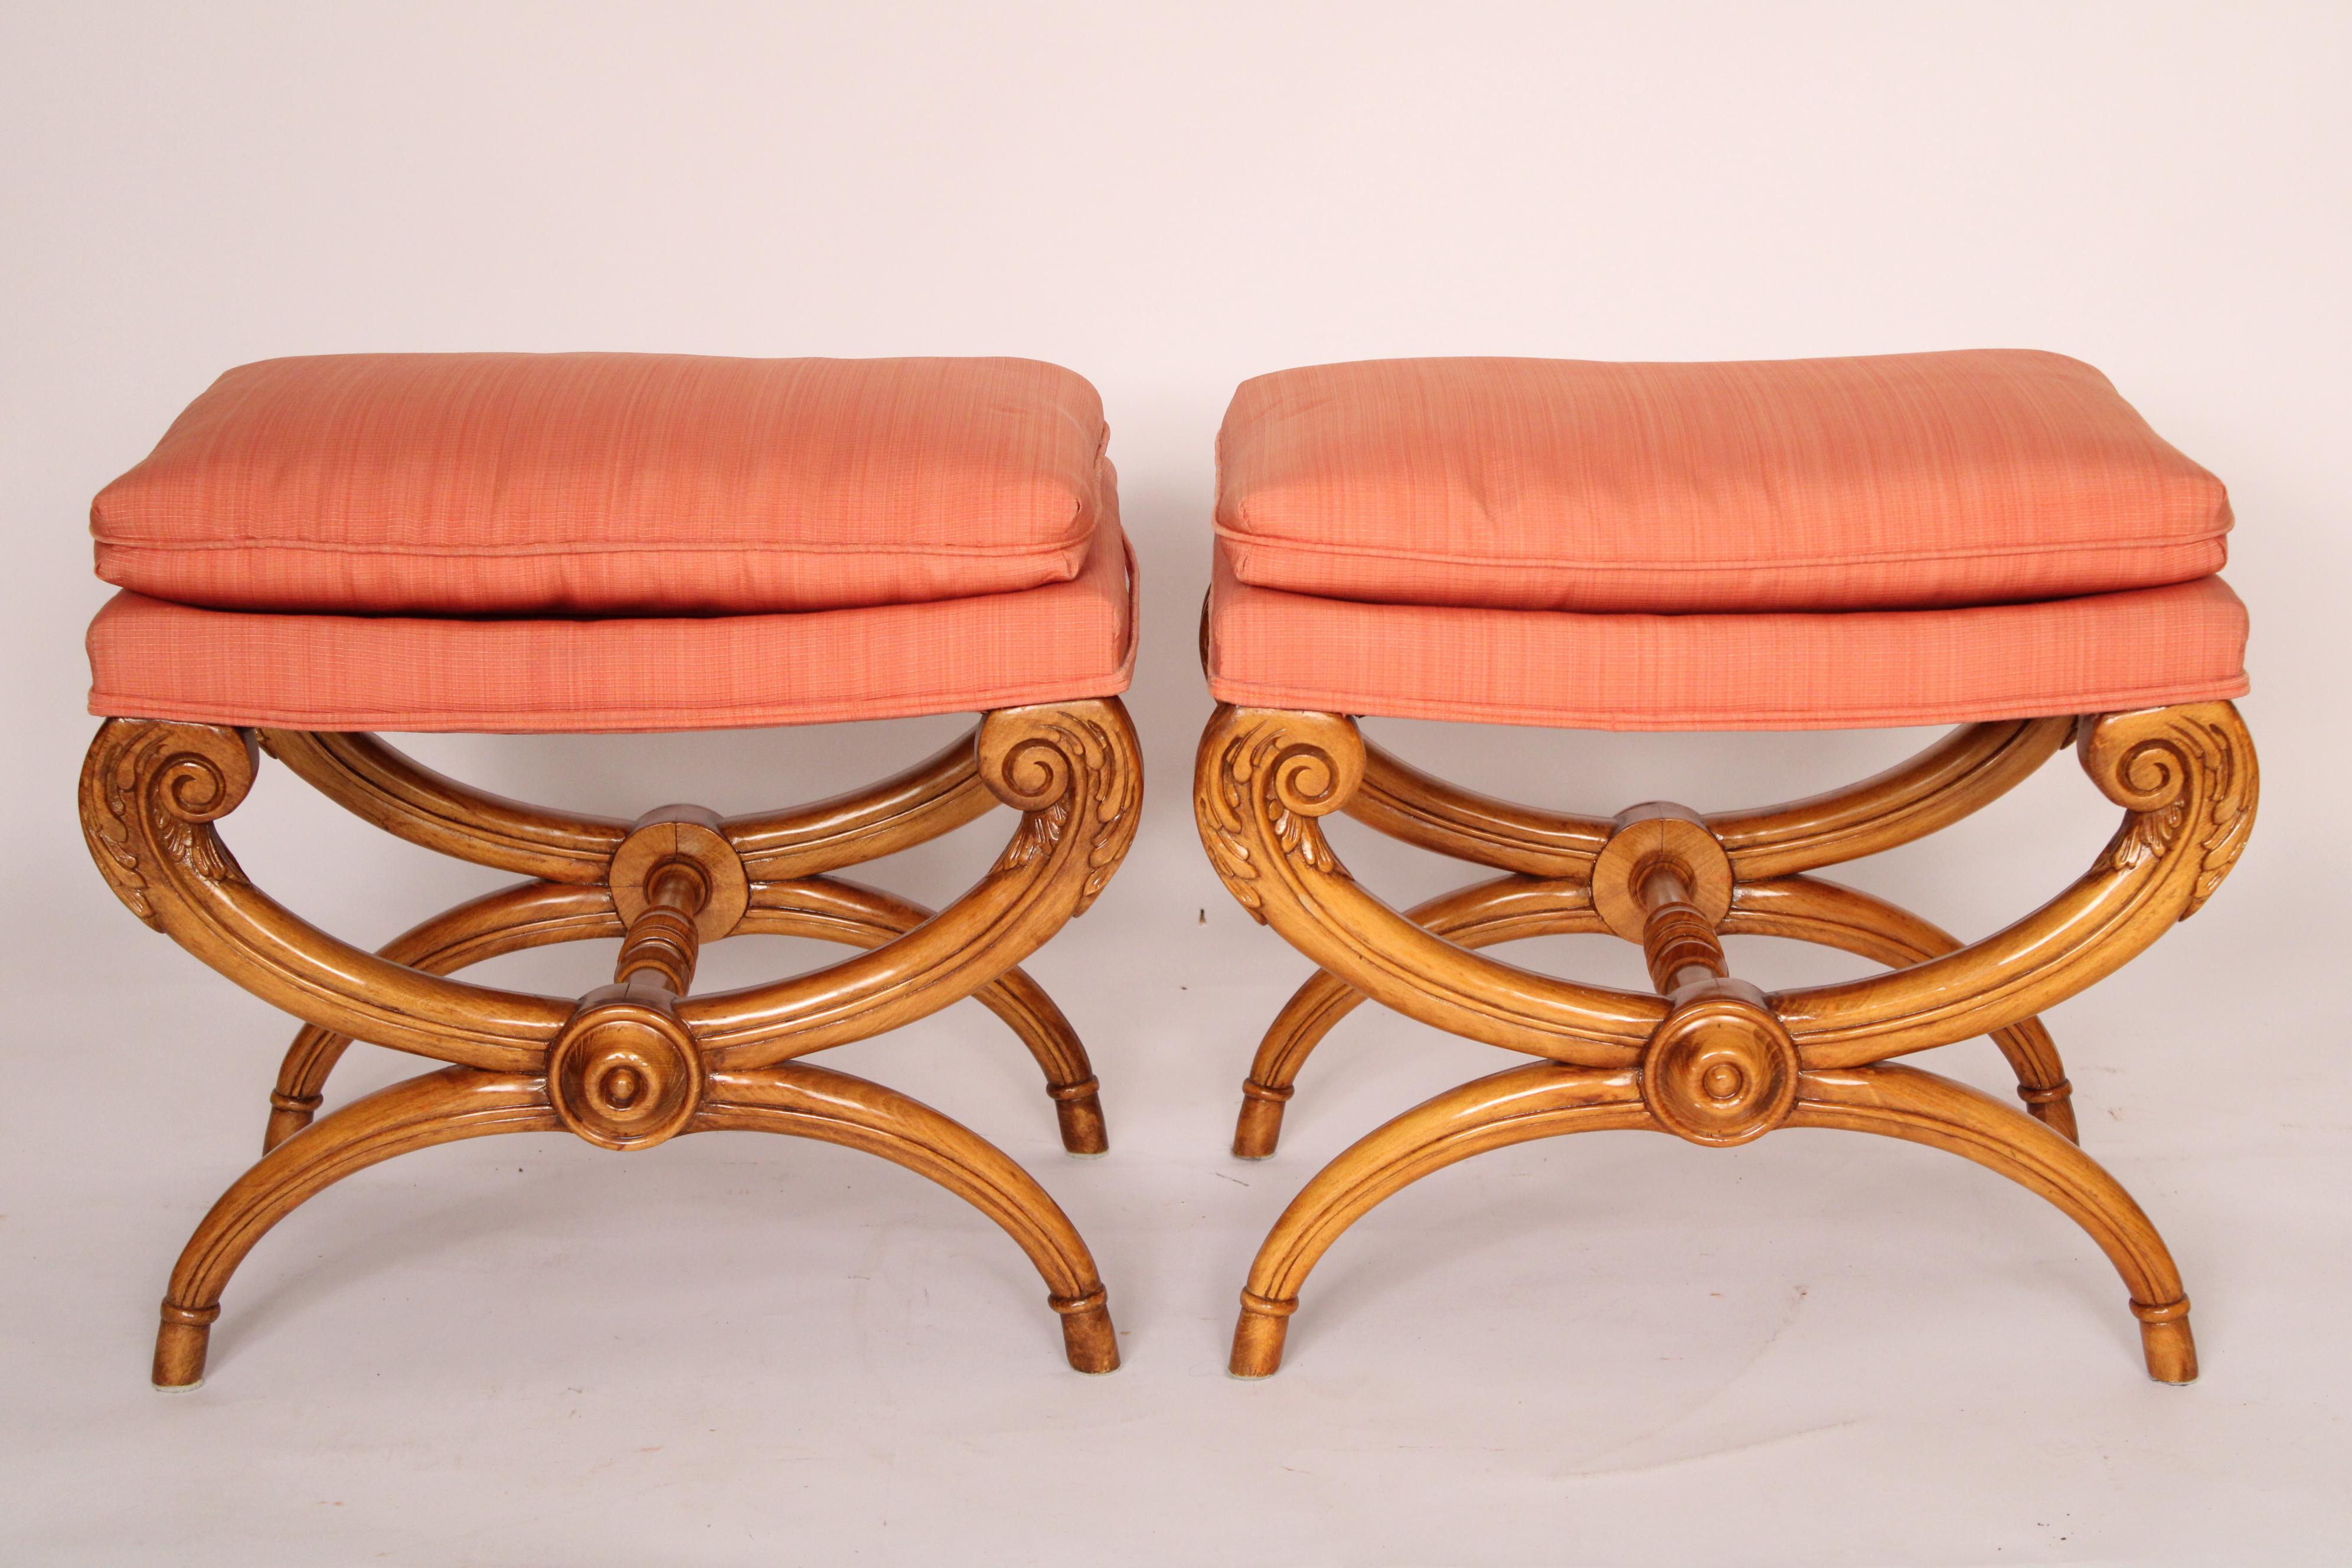 Pair of neo classical style curule form beech wood benches, late 20th century. 